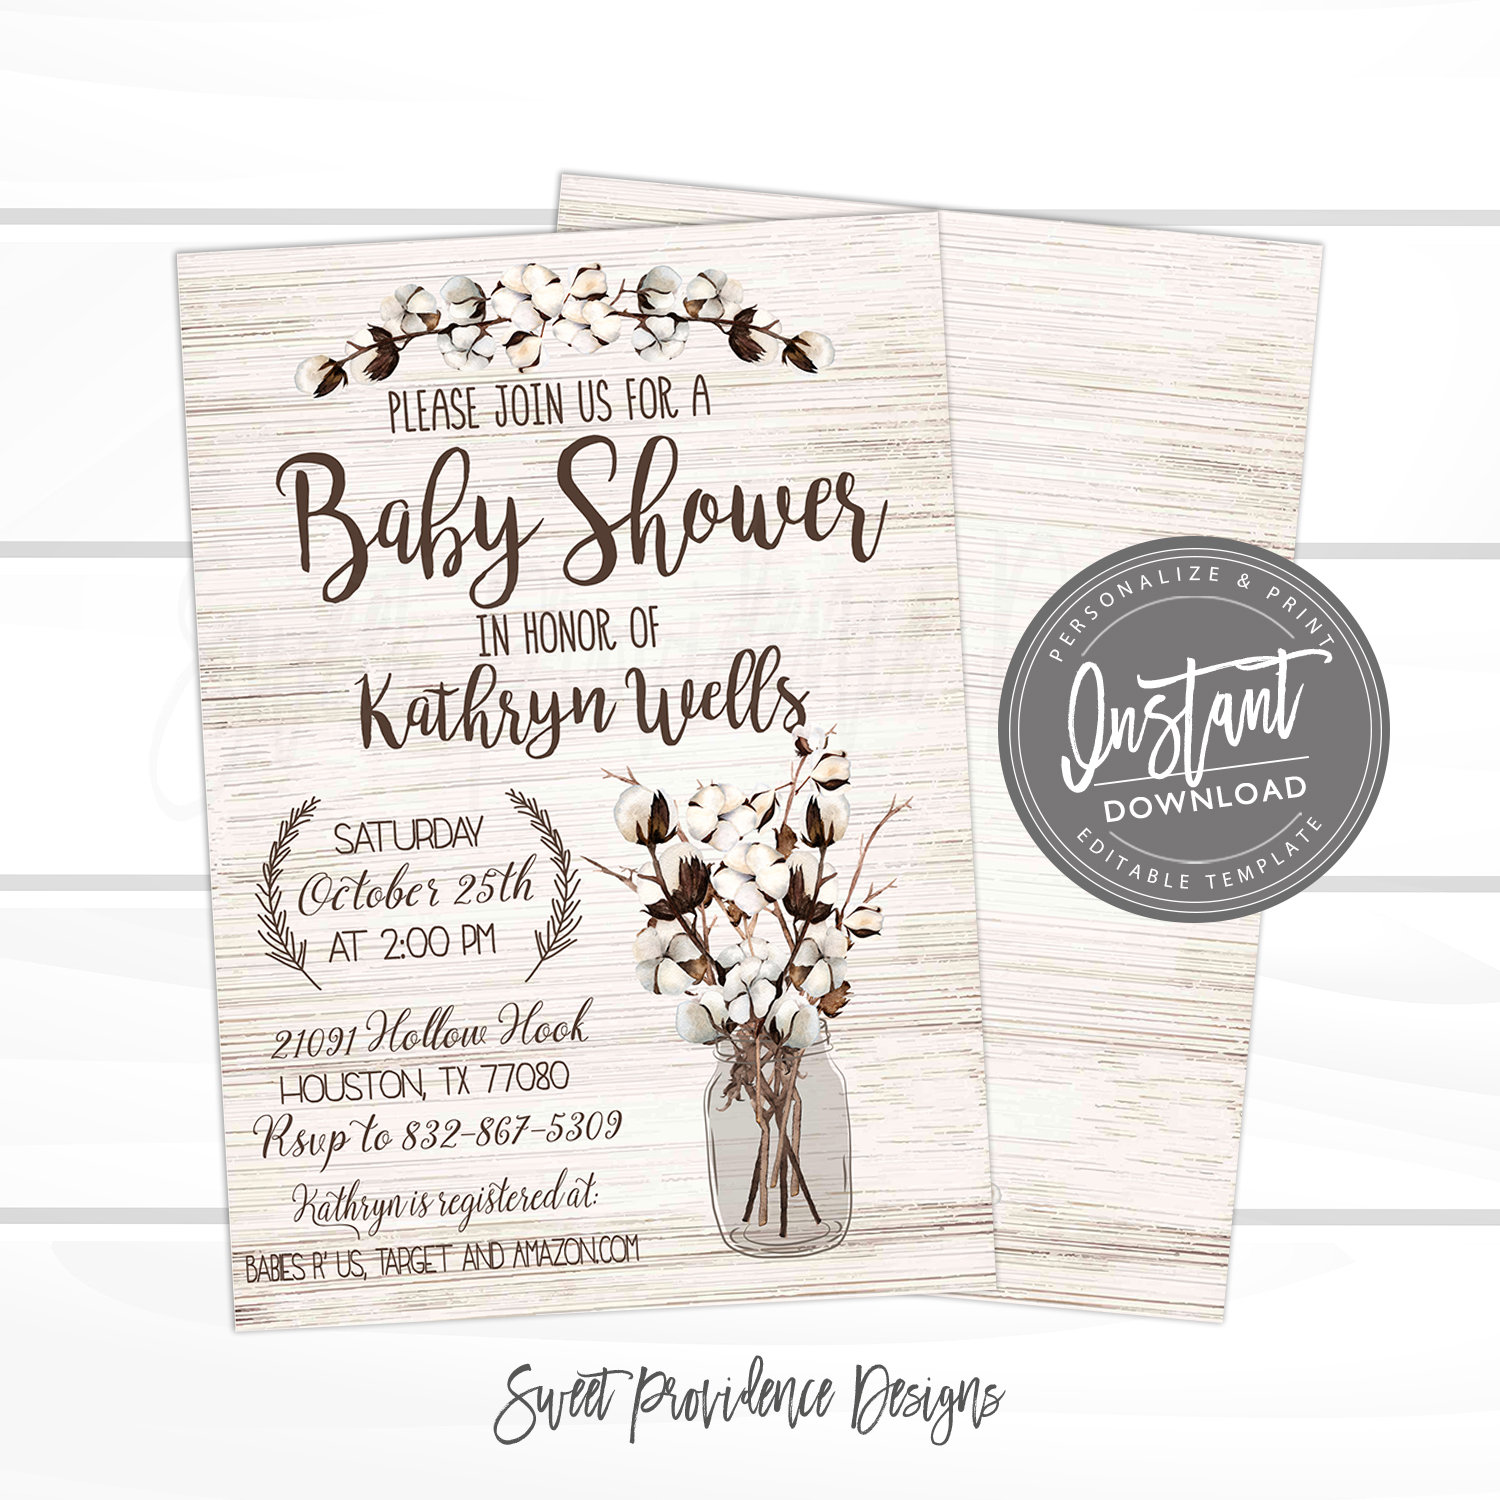 co-ed-rustic-baby-shower-invitation-line-circle-download-hundreds